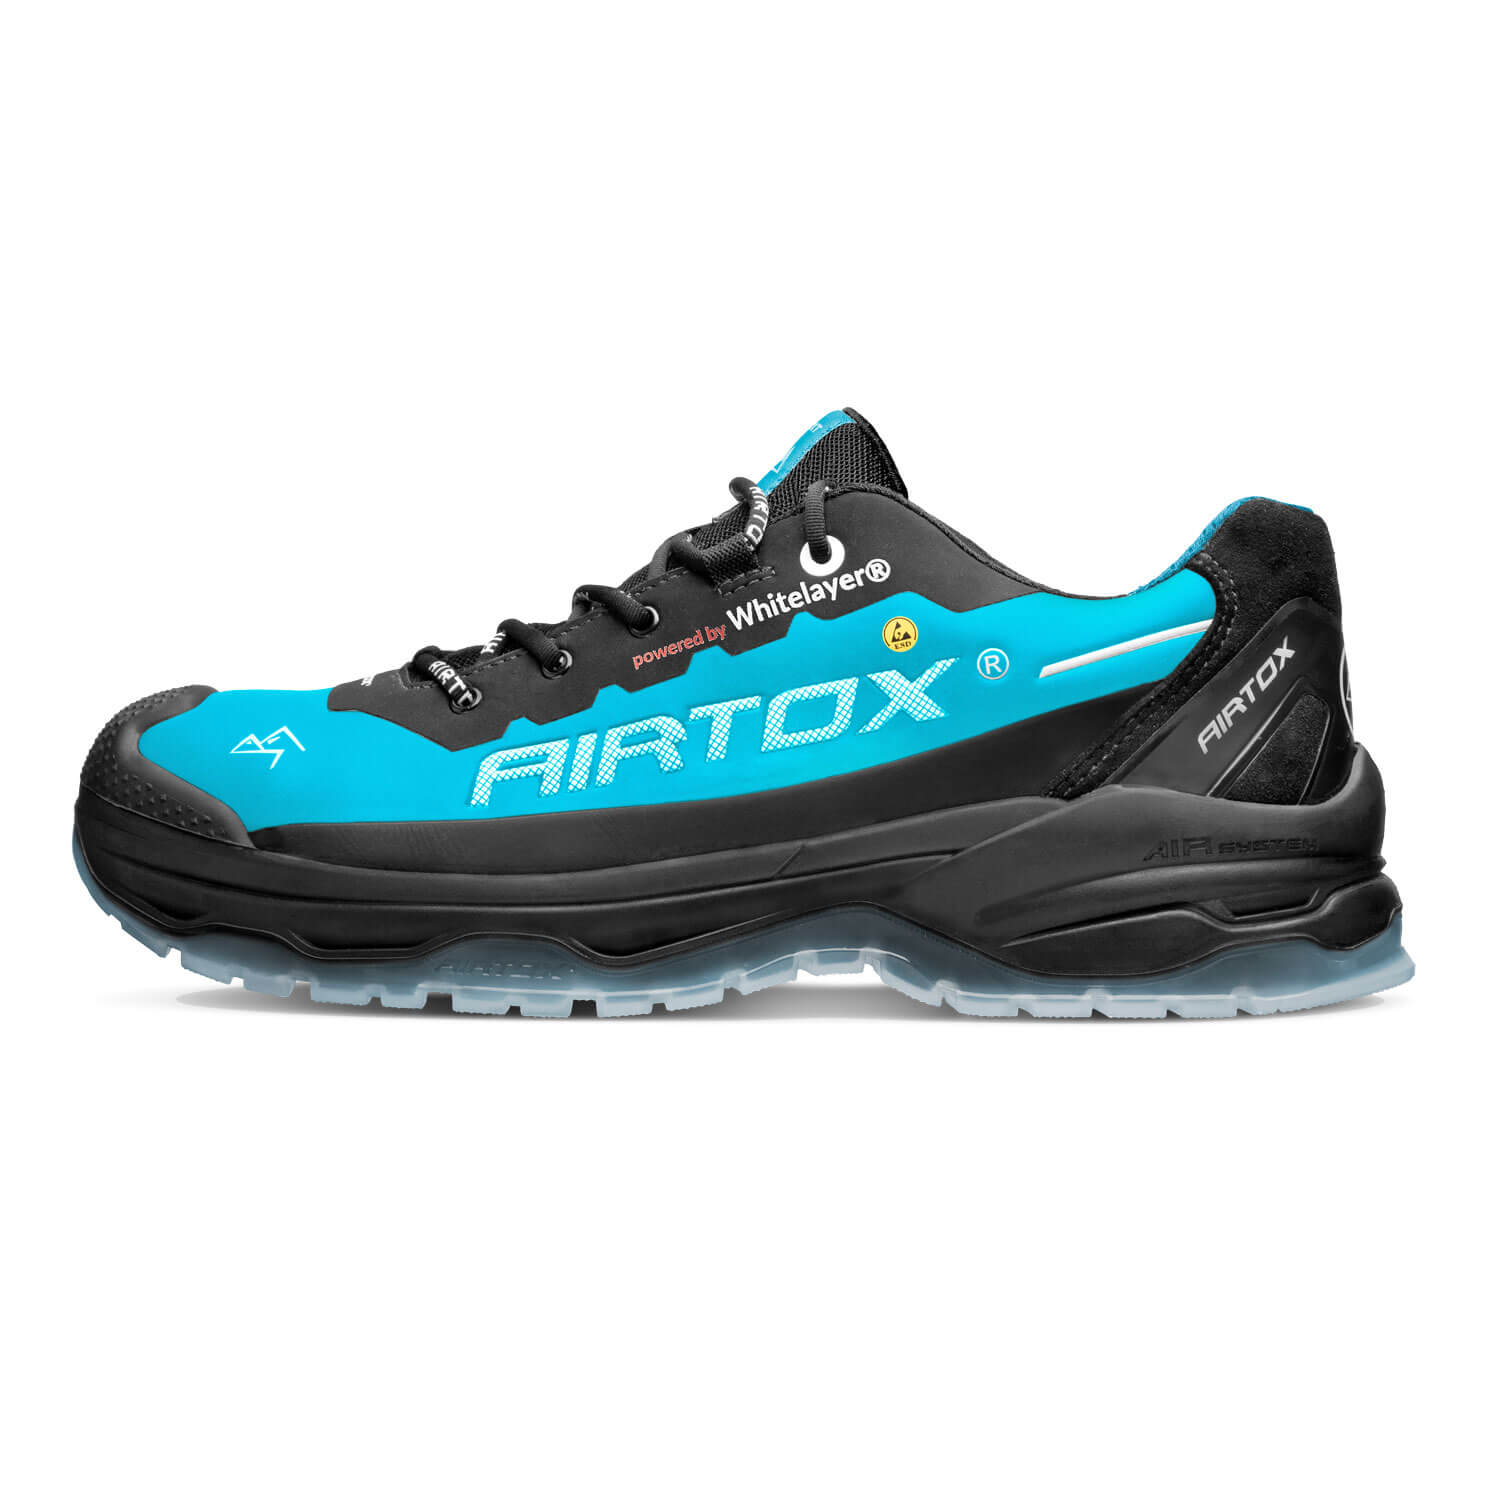 AIRTOX TX2 safety shoe | by AIRTOX